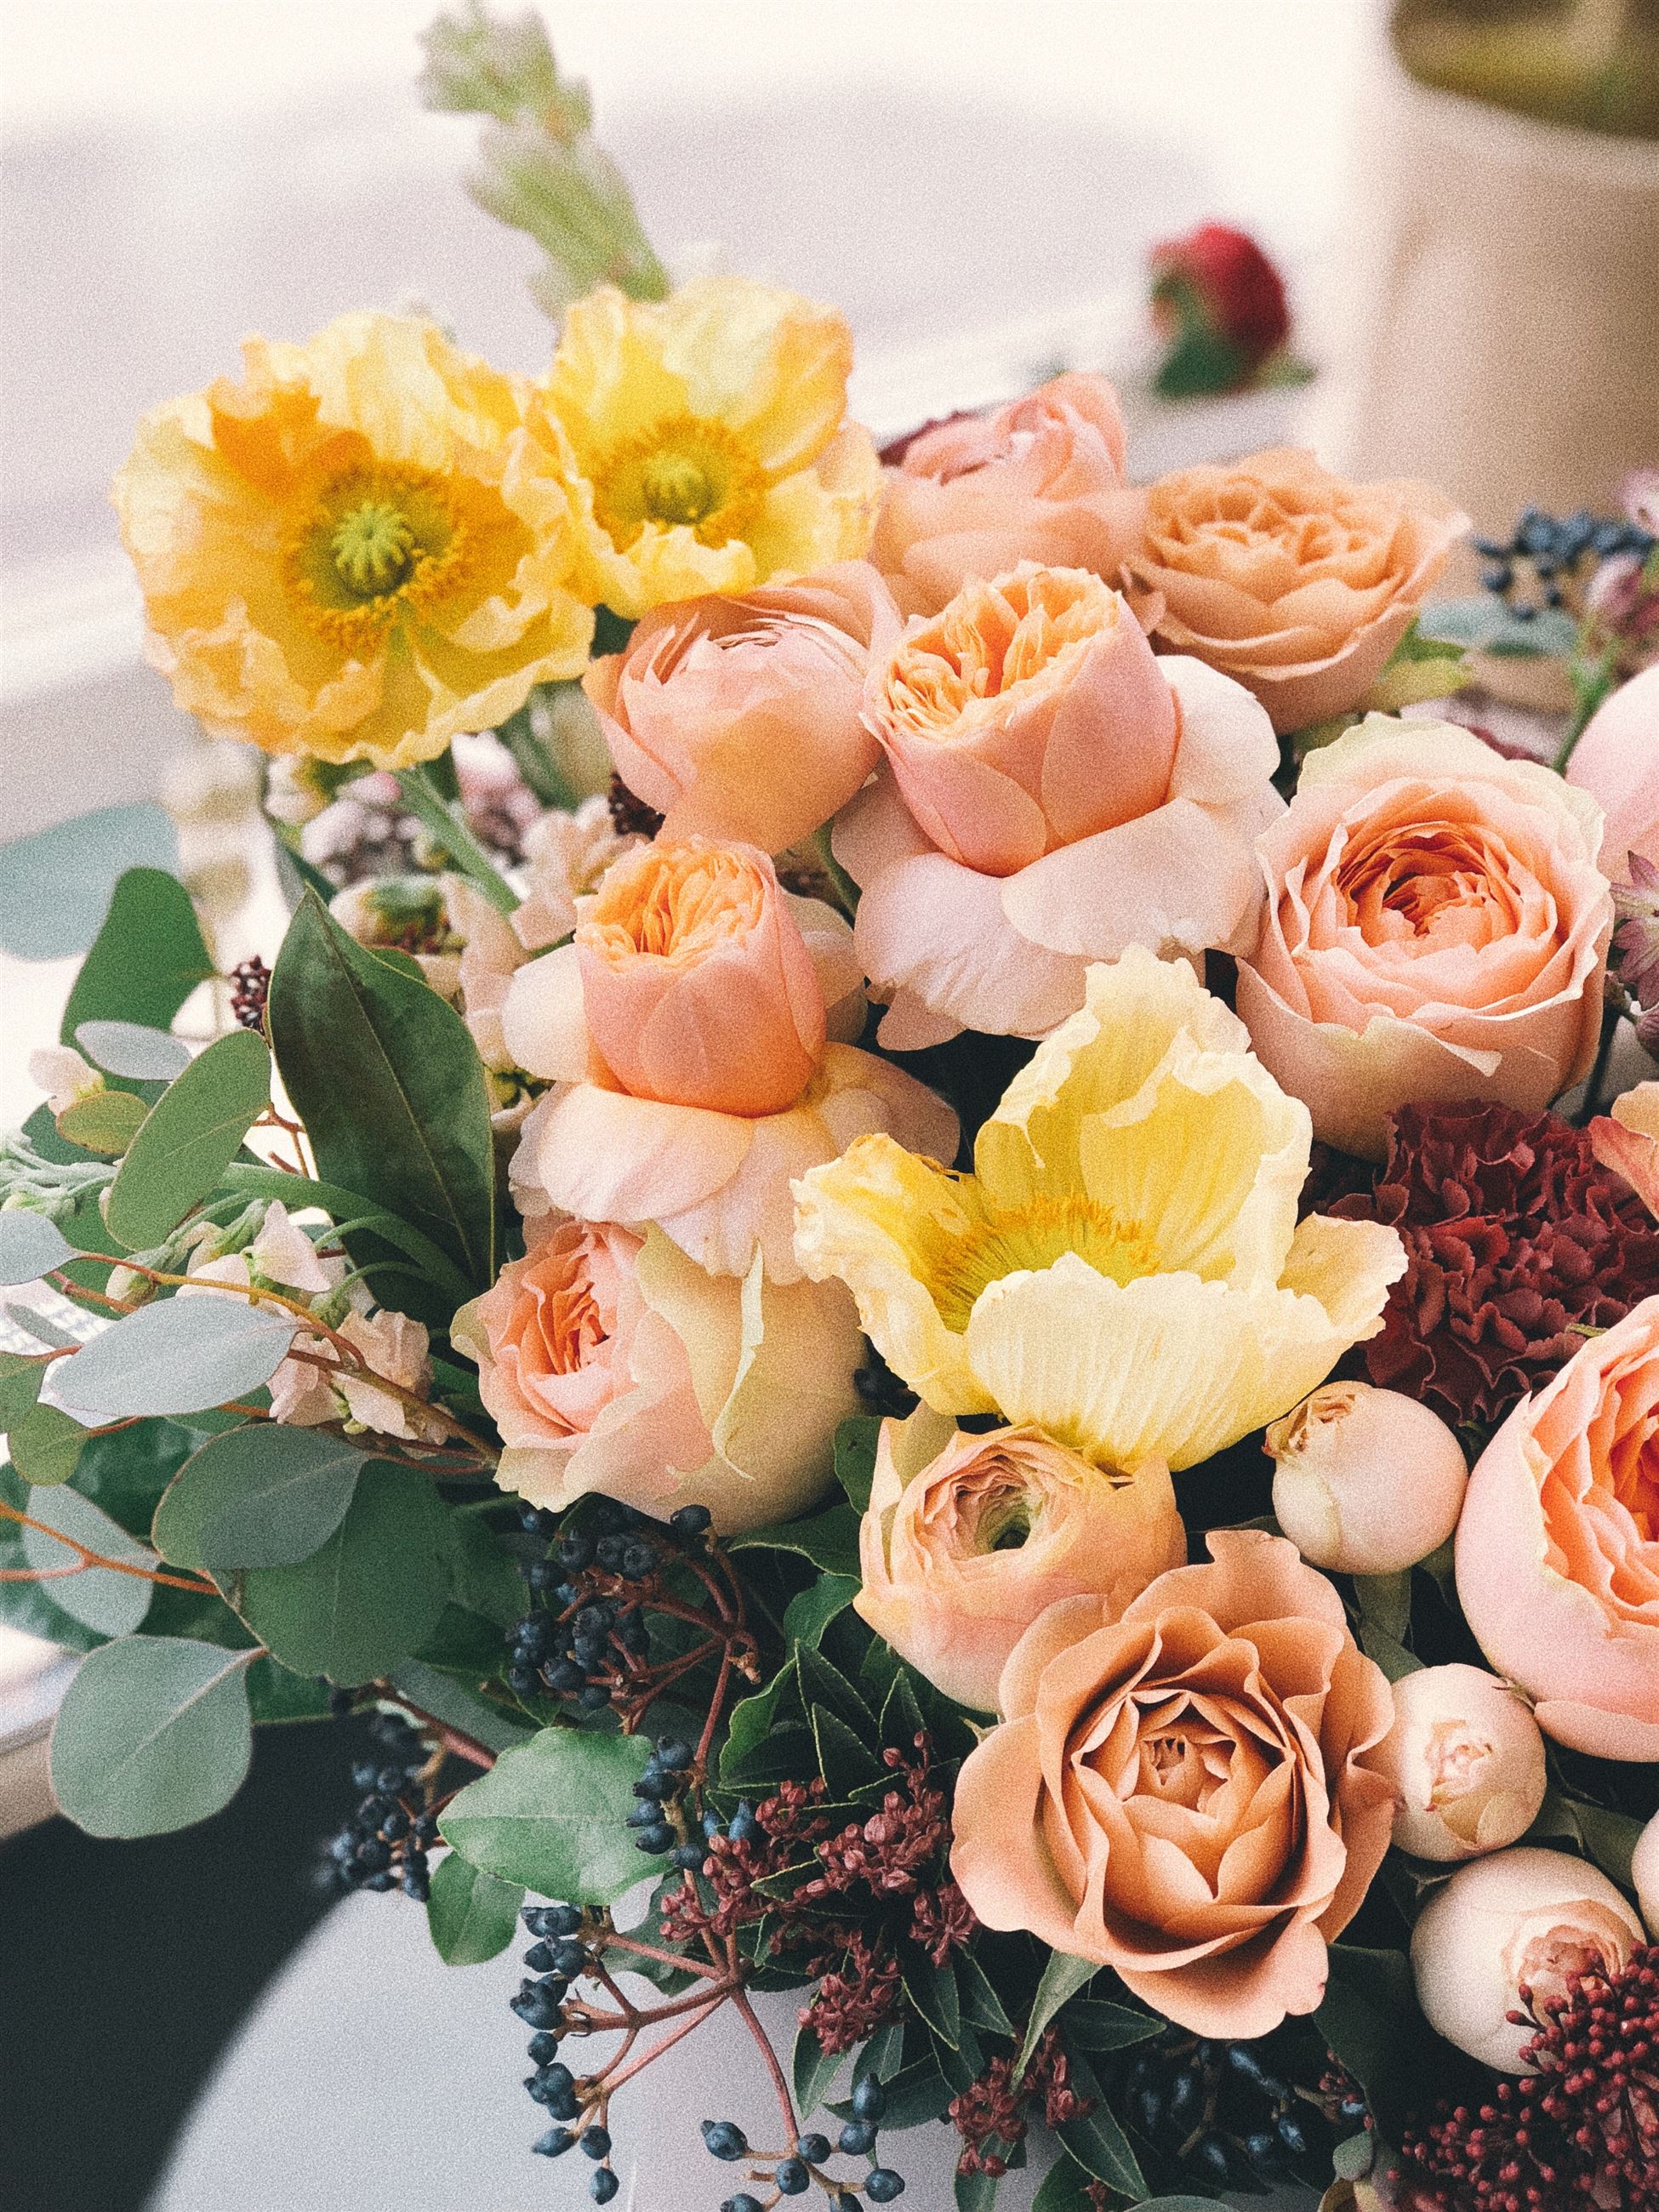 Bouquets on a Budget: 4 Ways to make the most of your Wedding flowers Image